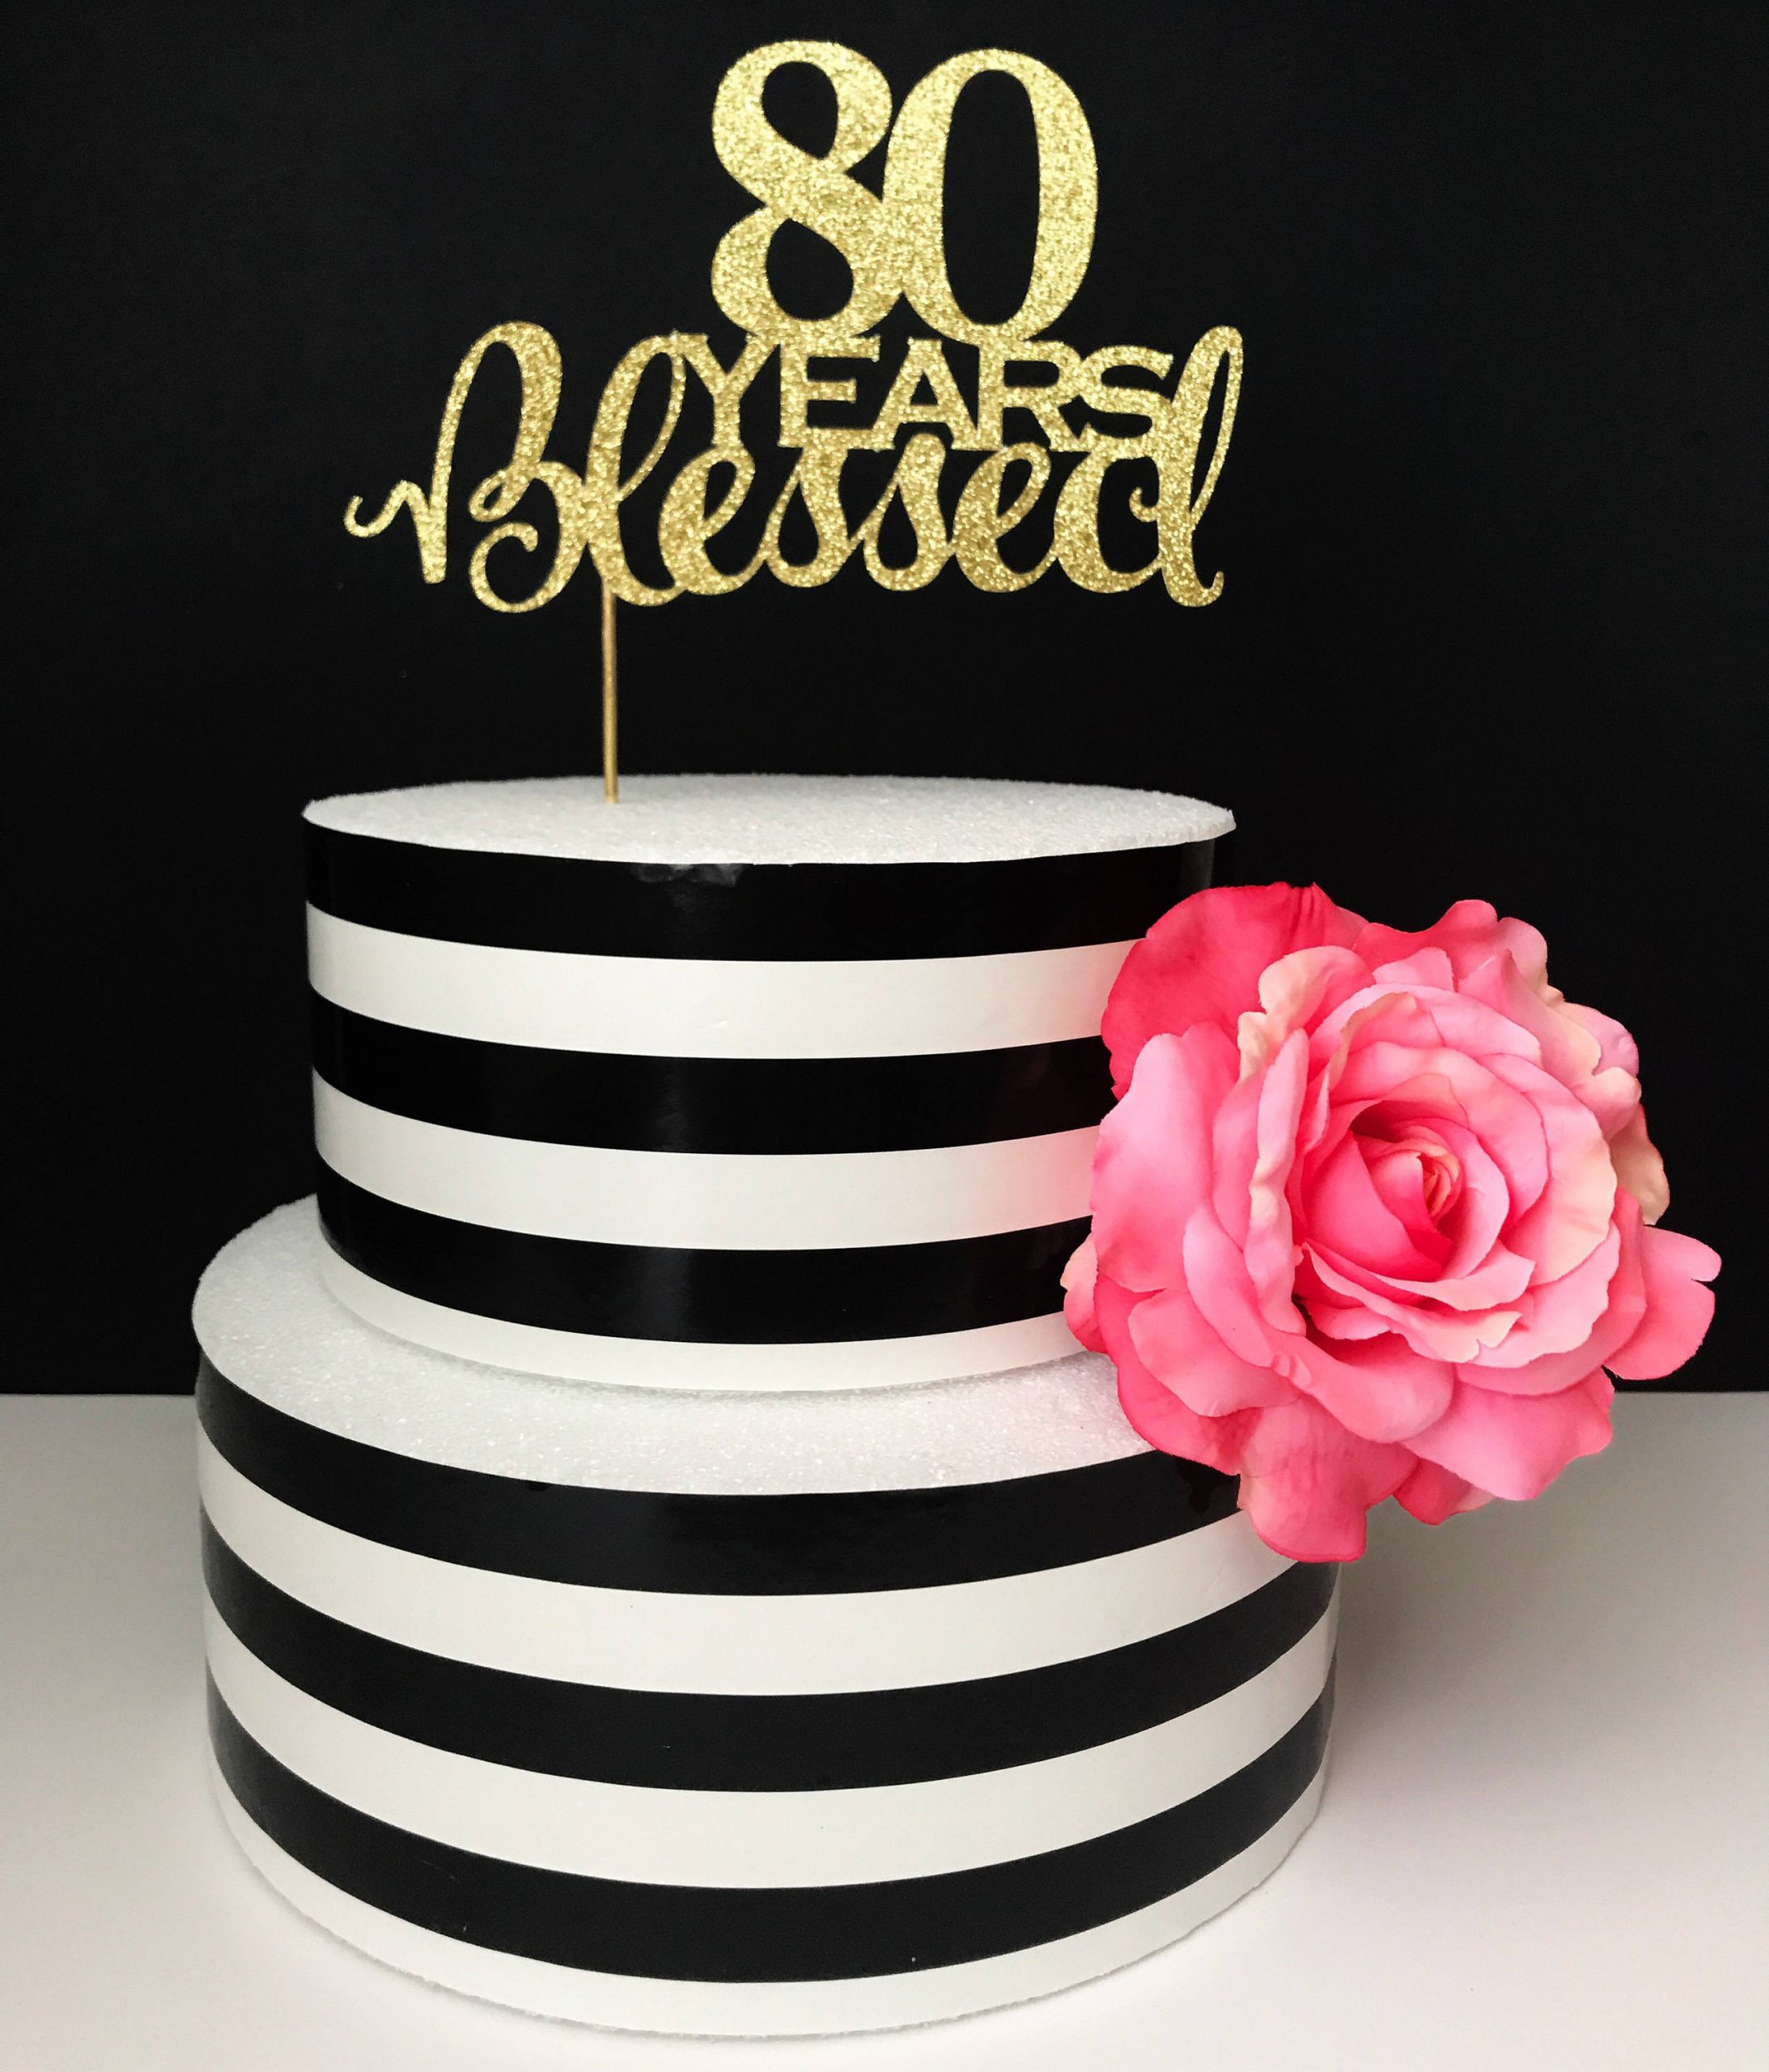 80th Birthday Cake Toppers
 80th birthday Cake Topper 80 years blessed cake topper Any